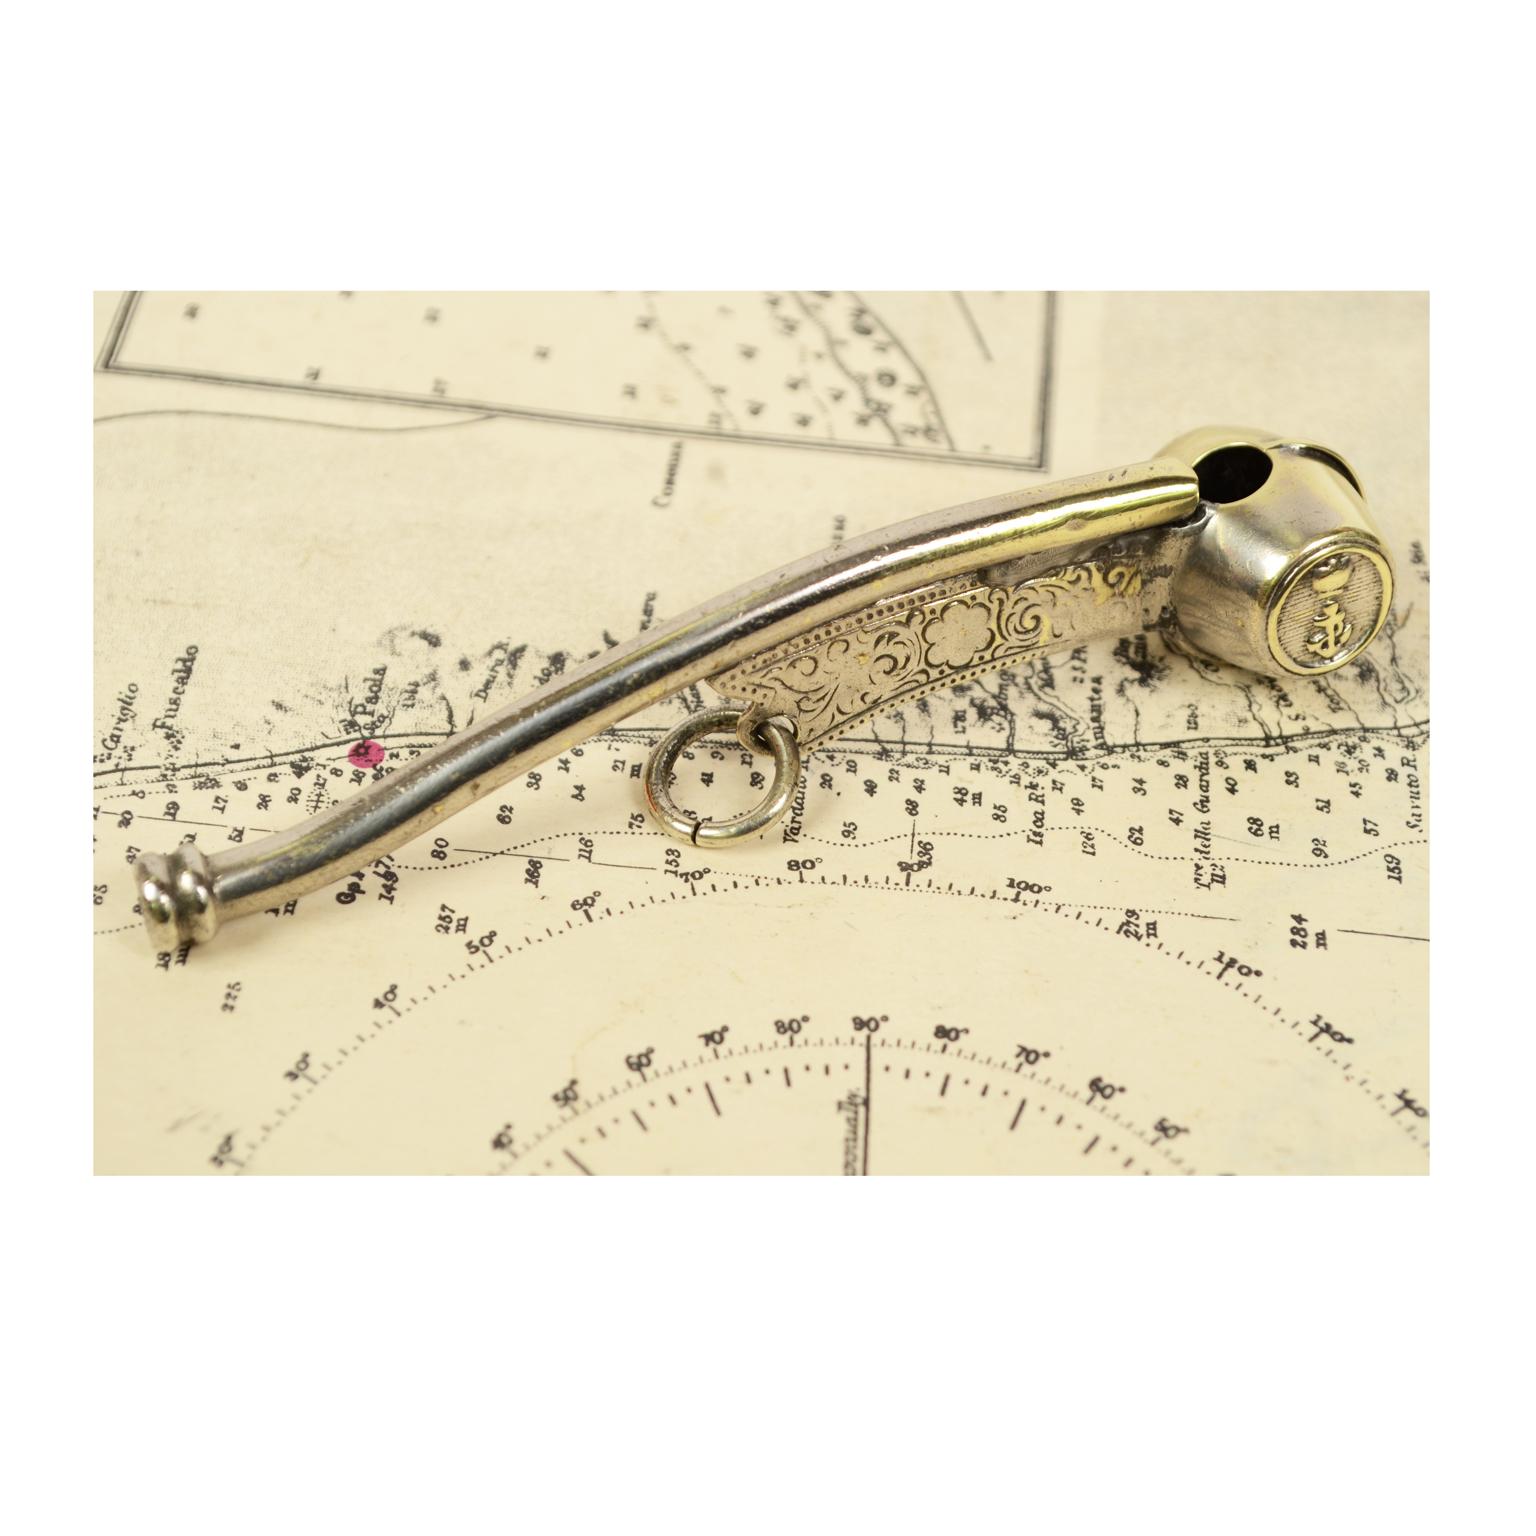 British Boatswain Whistle of Chromed Brass, English Manufacture, Early 1900s